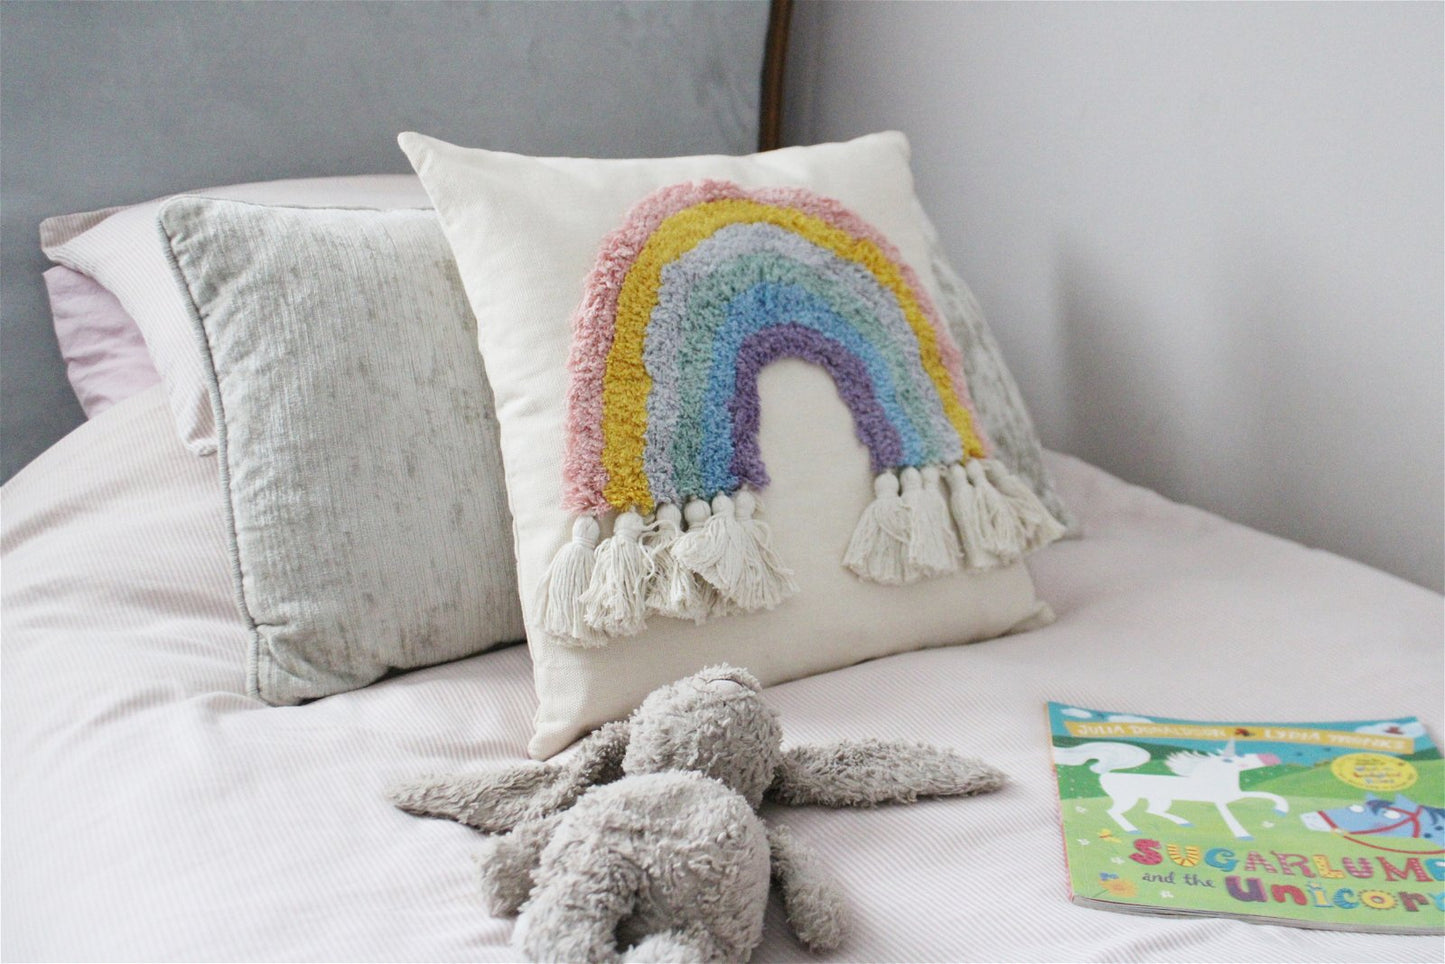 Rainbow Tassel Square Scatter Cushion (45x45cm) - UK Only